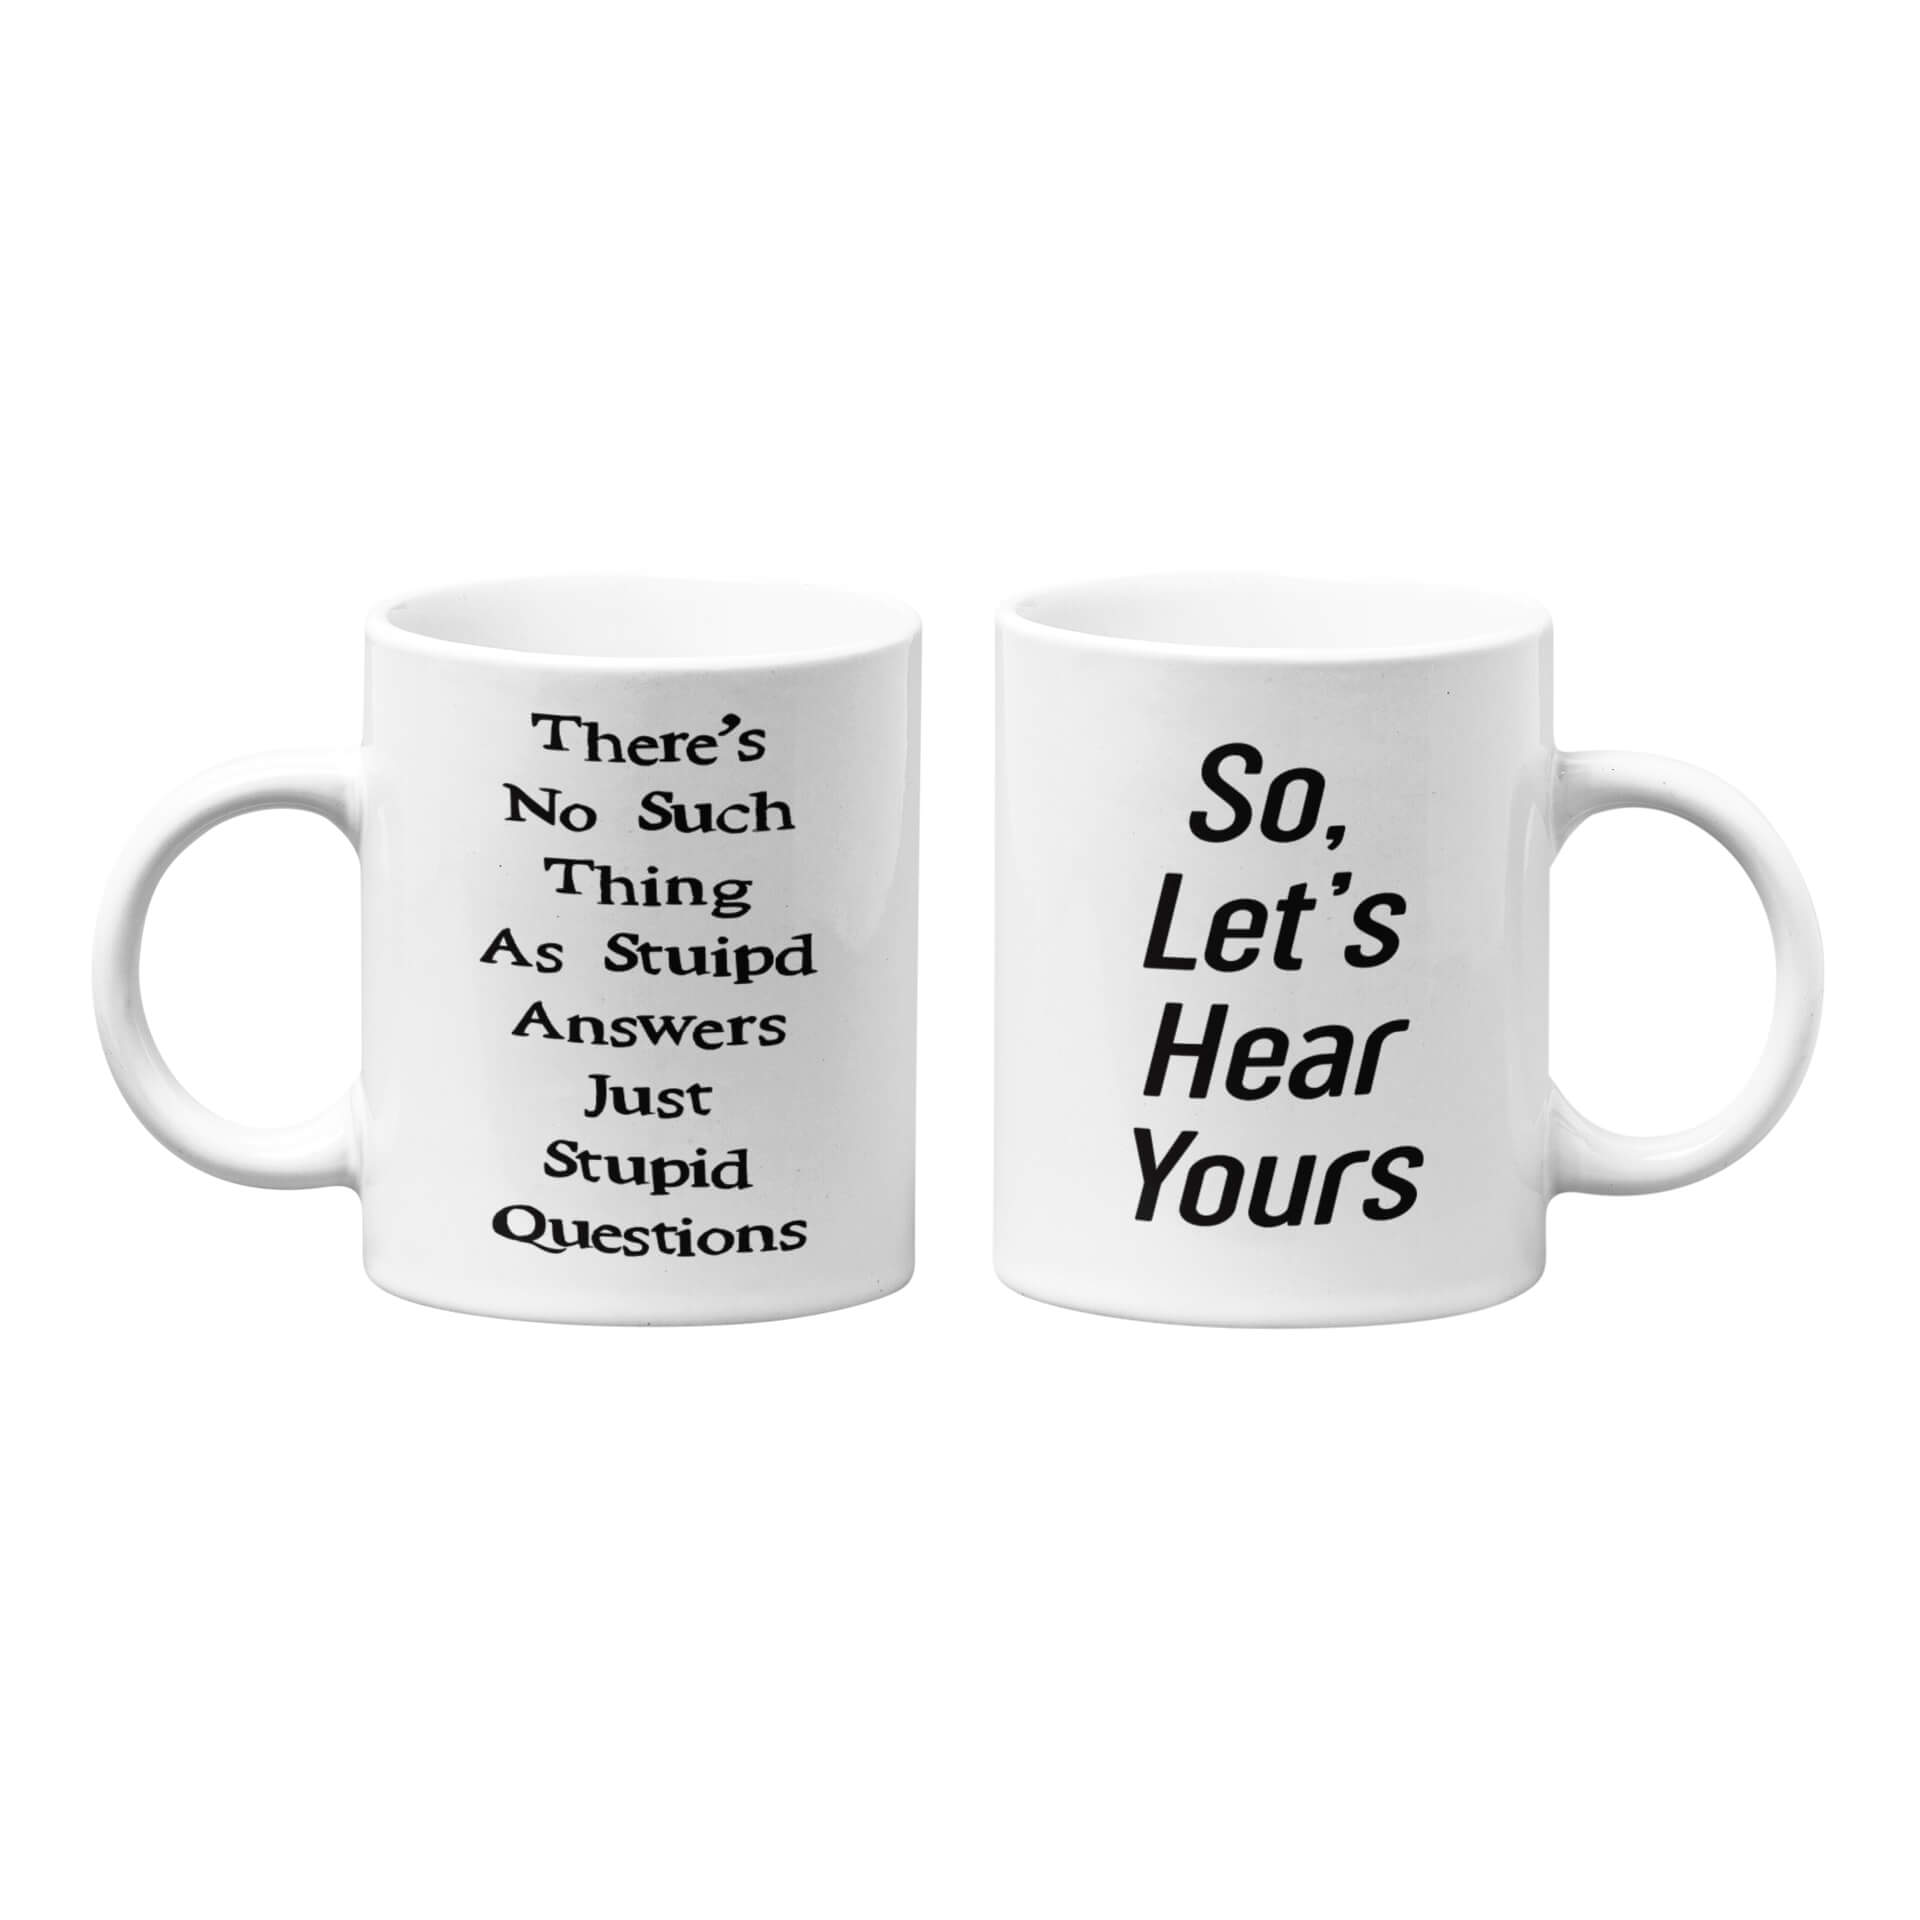 There's No Such Thing As Stupid Answers Mug